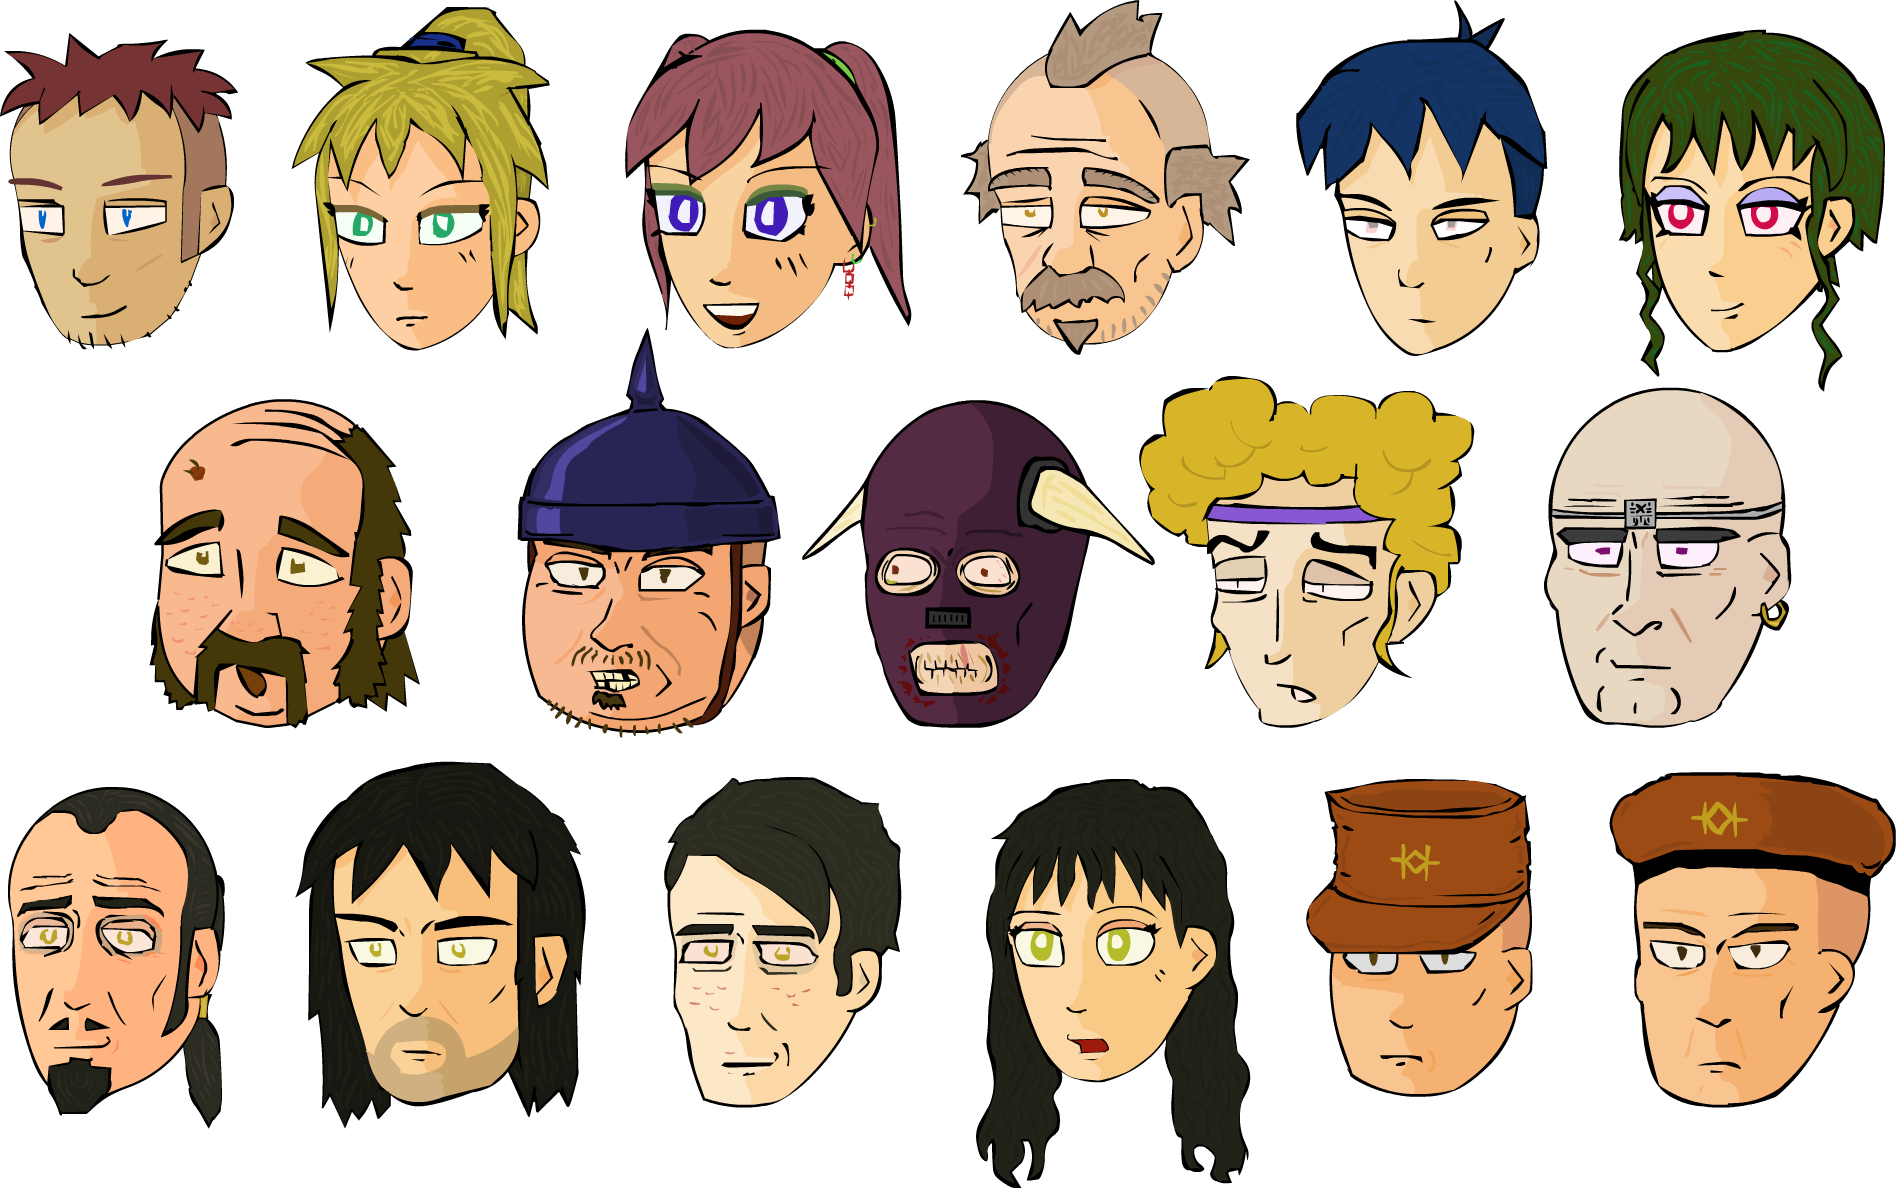 World's End Character Art (2006)